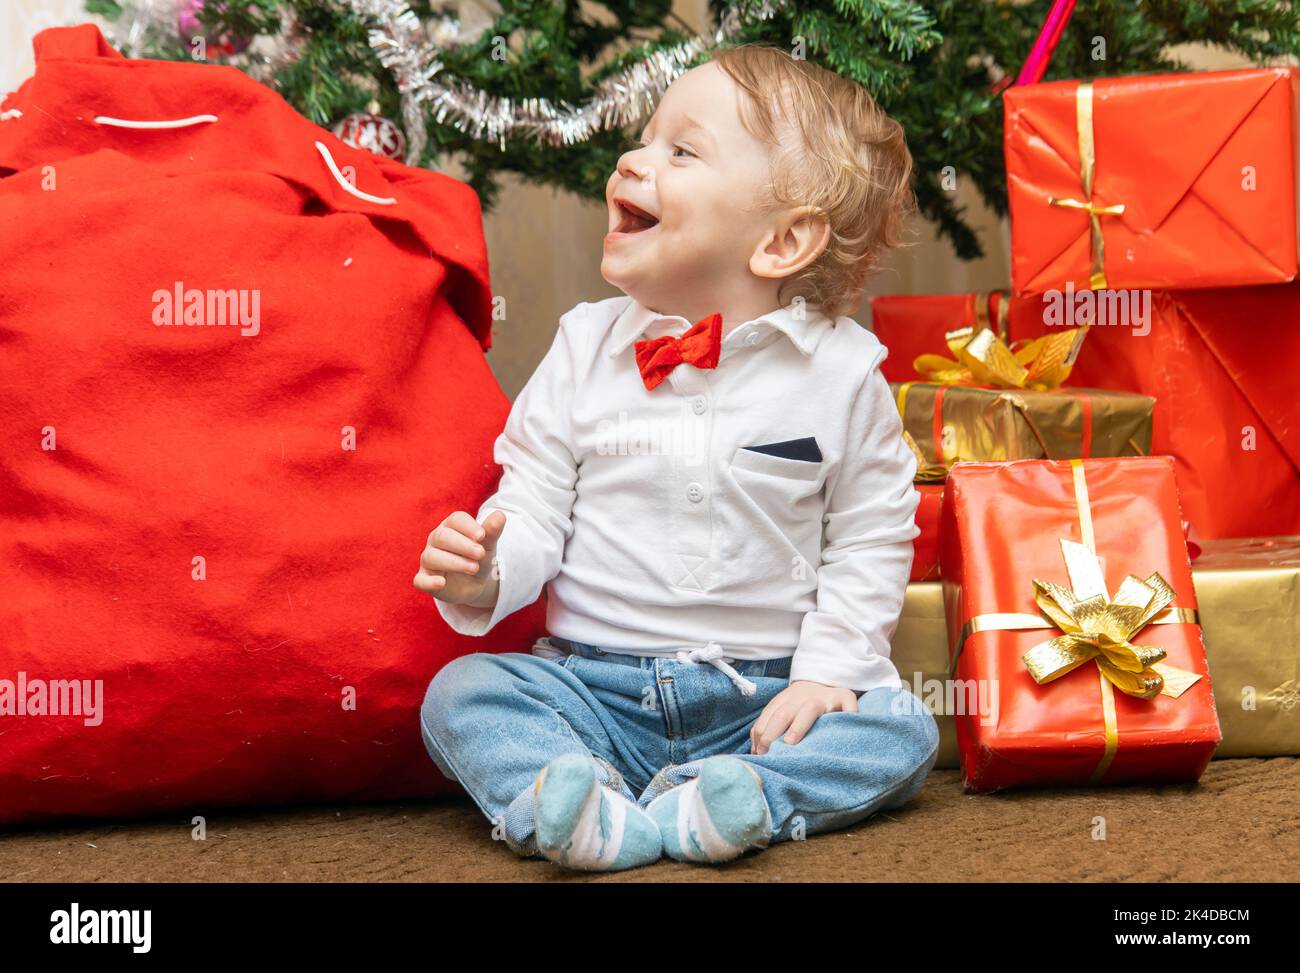 Little boy sits near Christmas presents and laughs Stock Photo